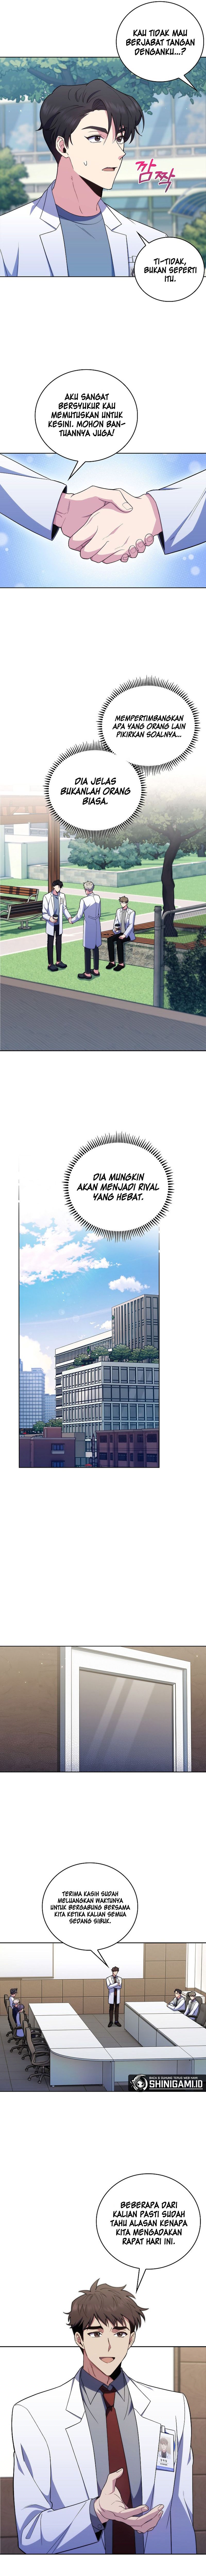 level-up-doctor Chapter 76